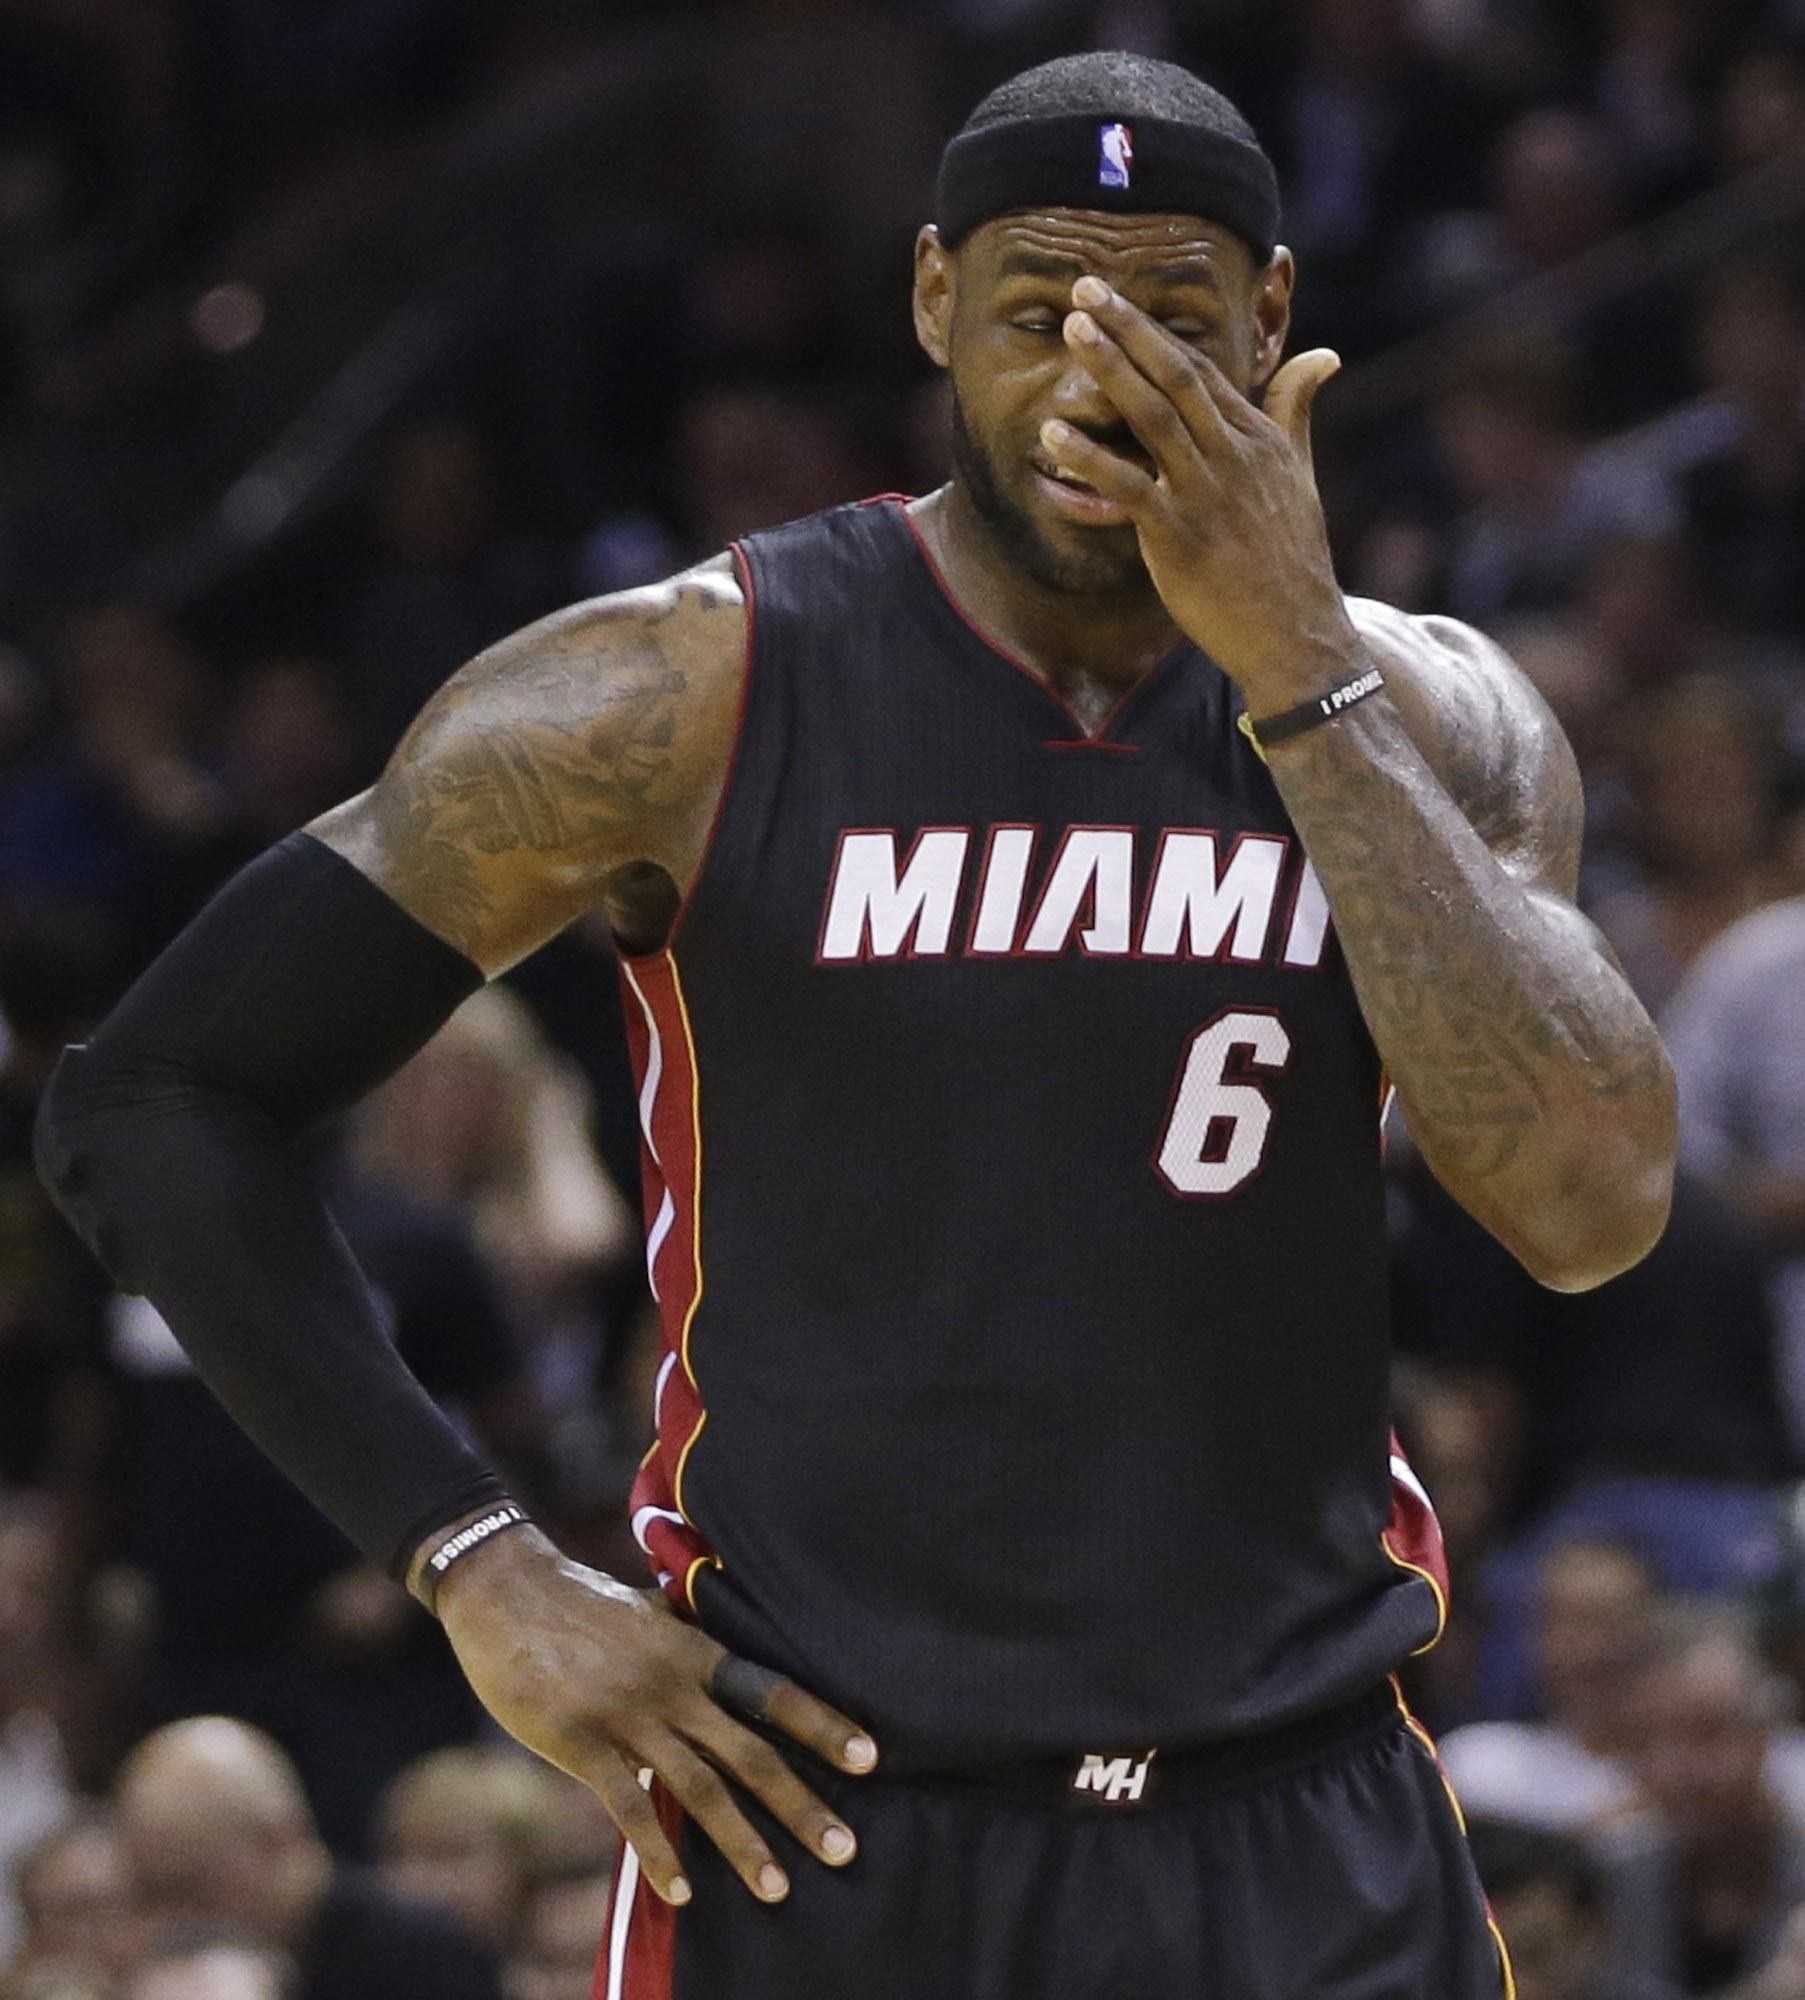 PHOTO: Miami Heat forward LeBron James pauses between plays against the San Antonio Spurs during the second half in Game 5 of the NBA basketball finals, June 15, 2014, in San Antonio.